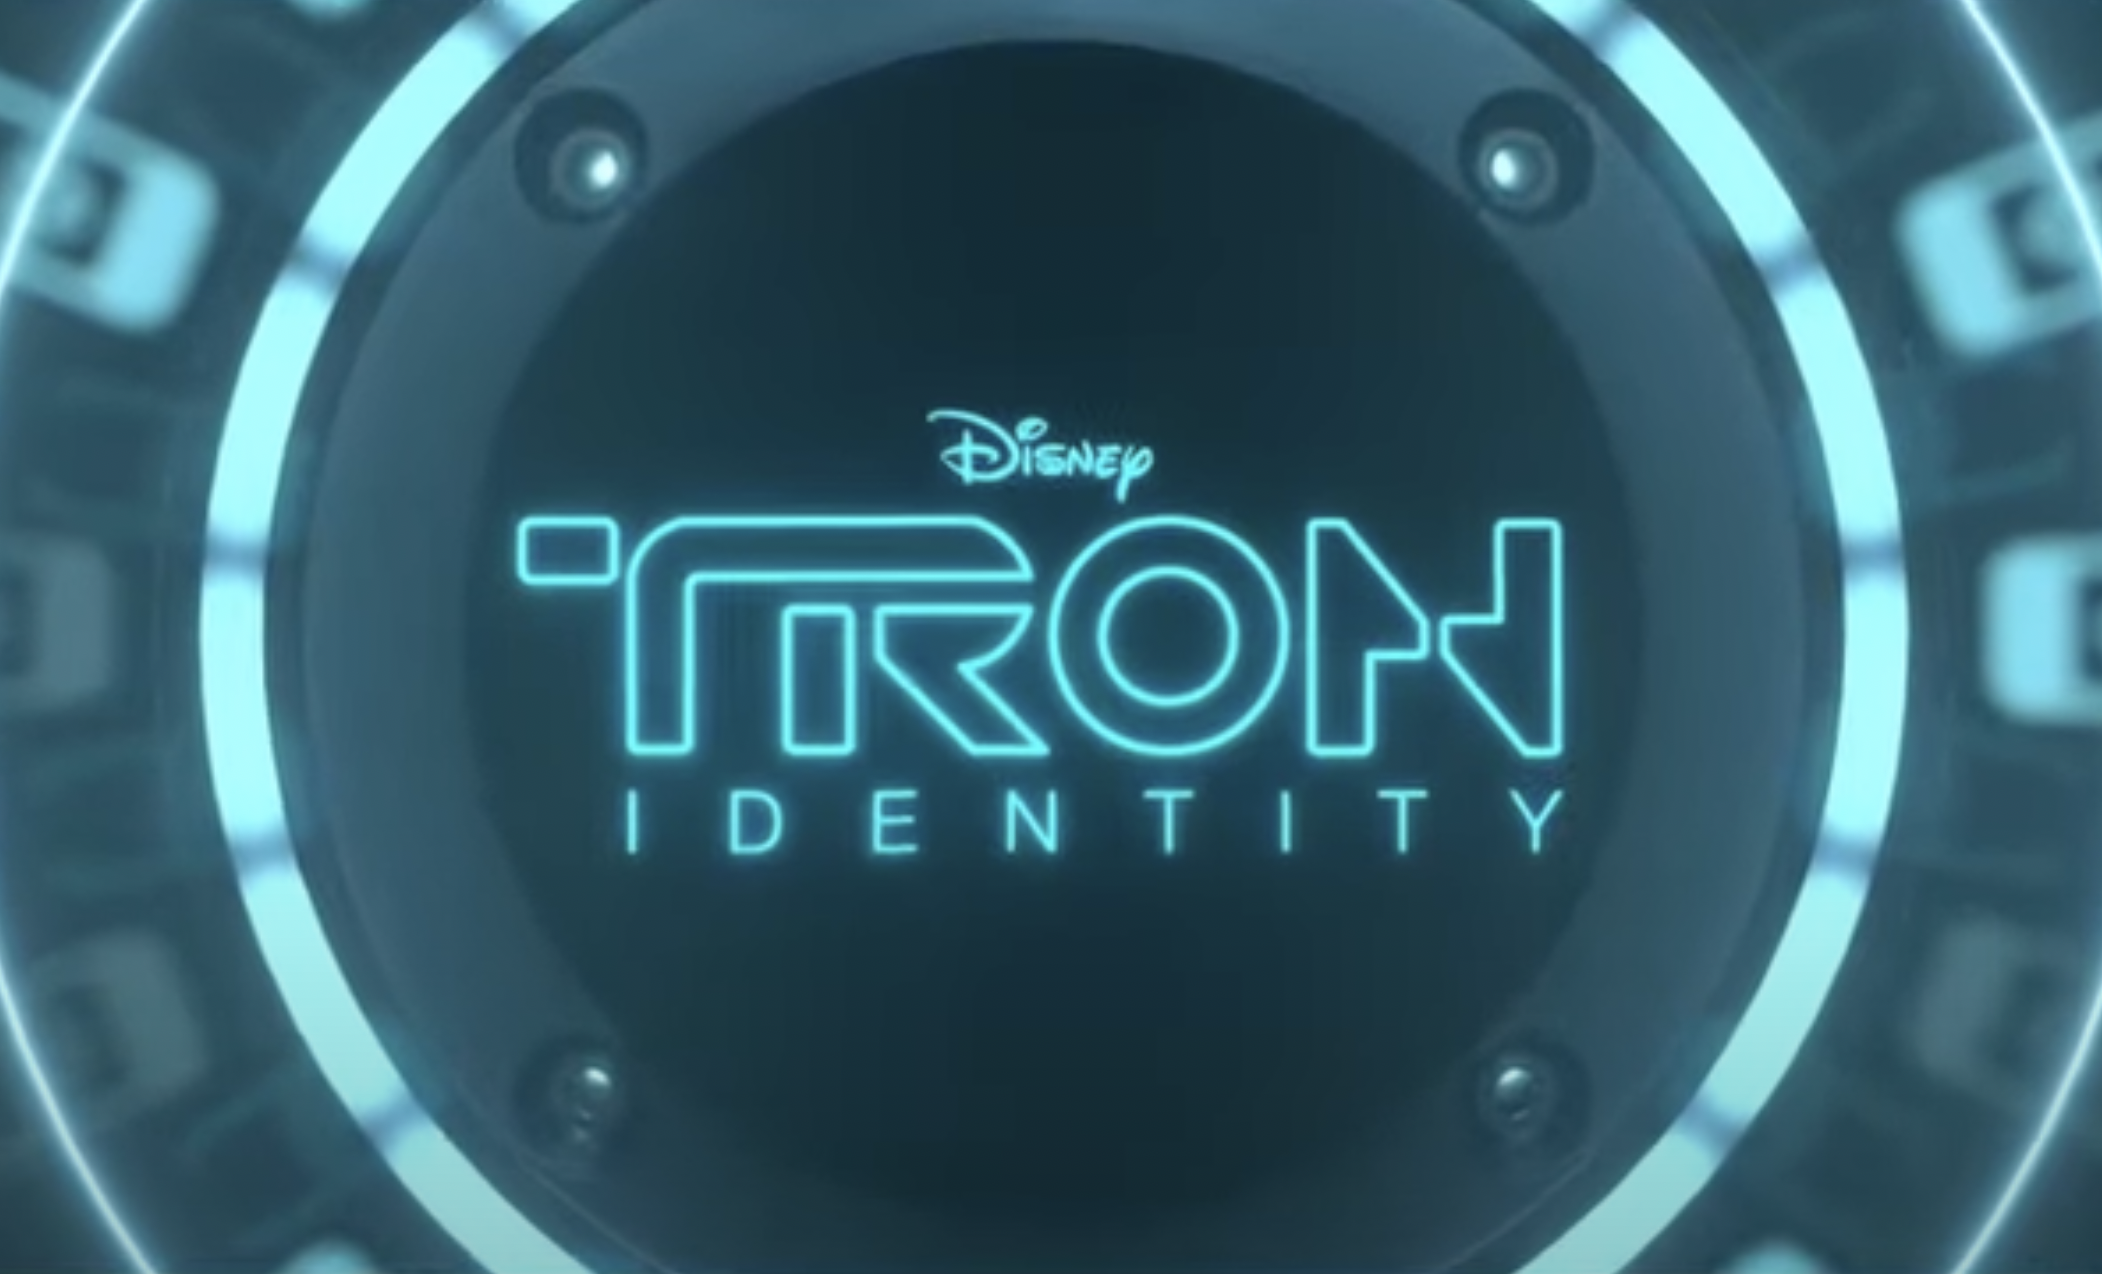 SEE IT: Disney Unveils Teaser For New ‘TRON Identity’ Video Game